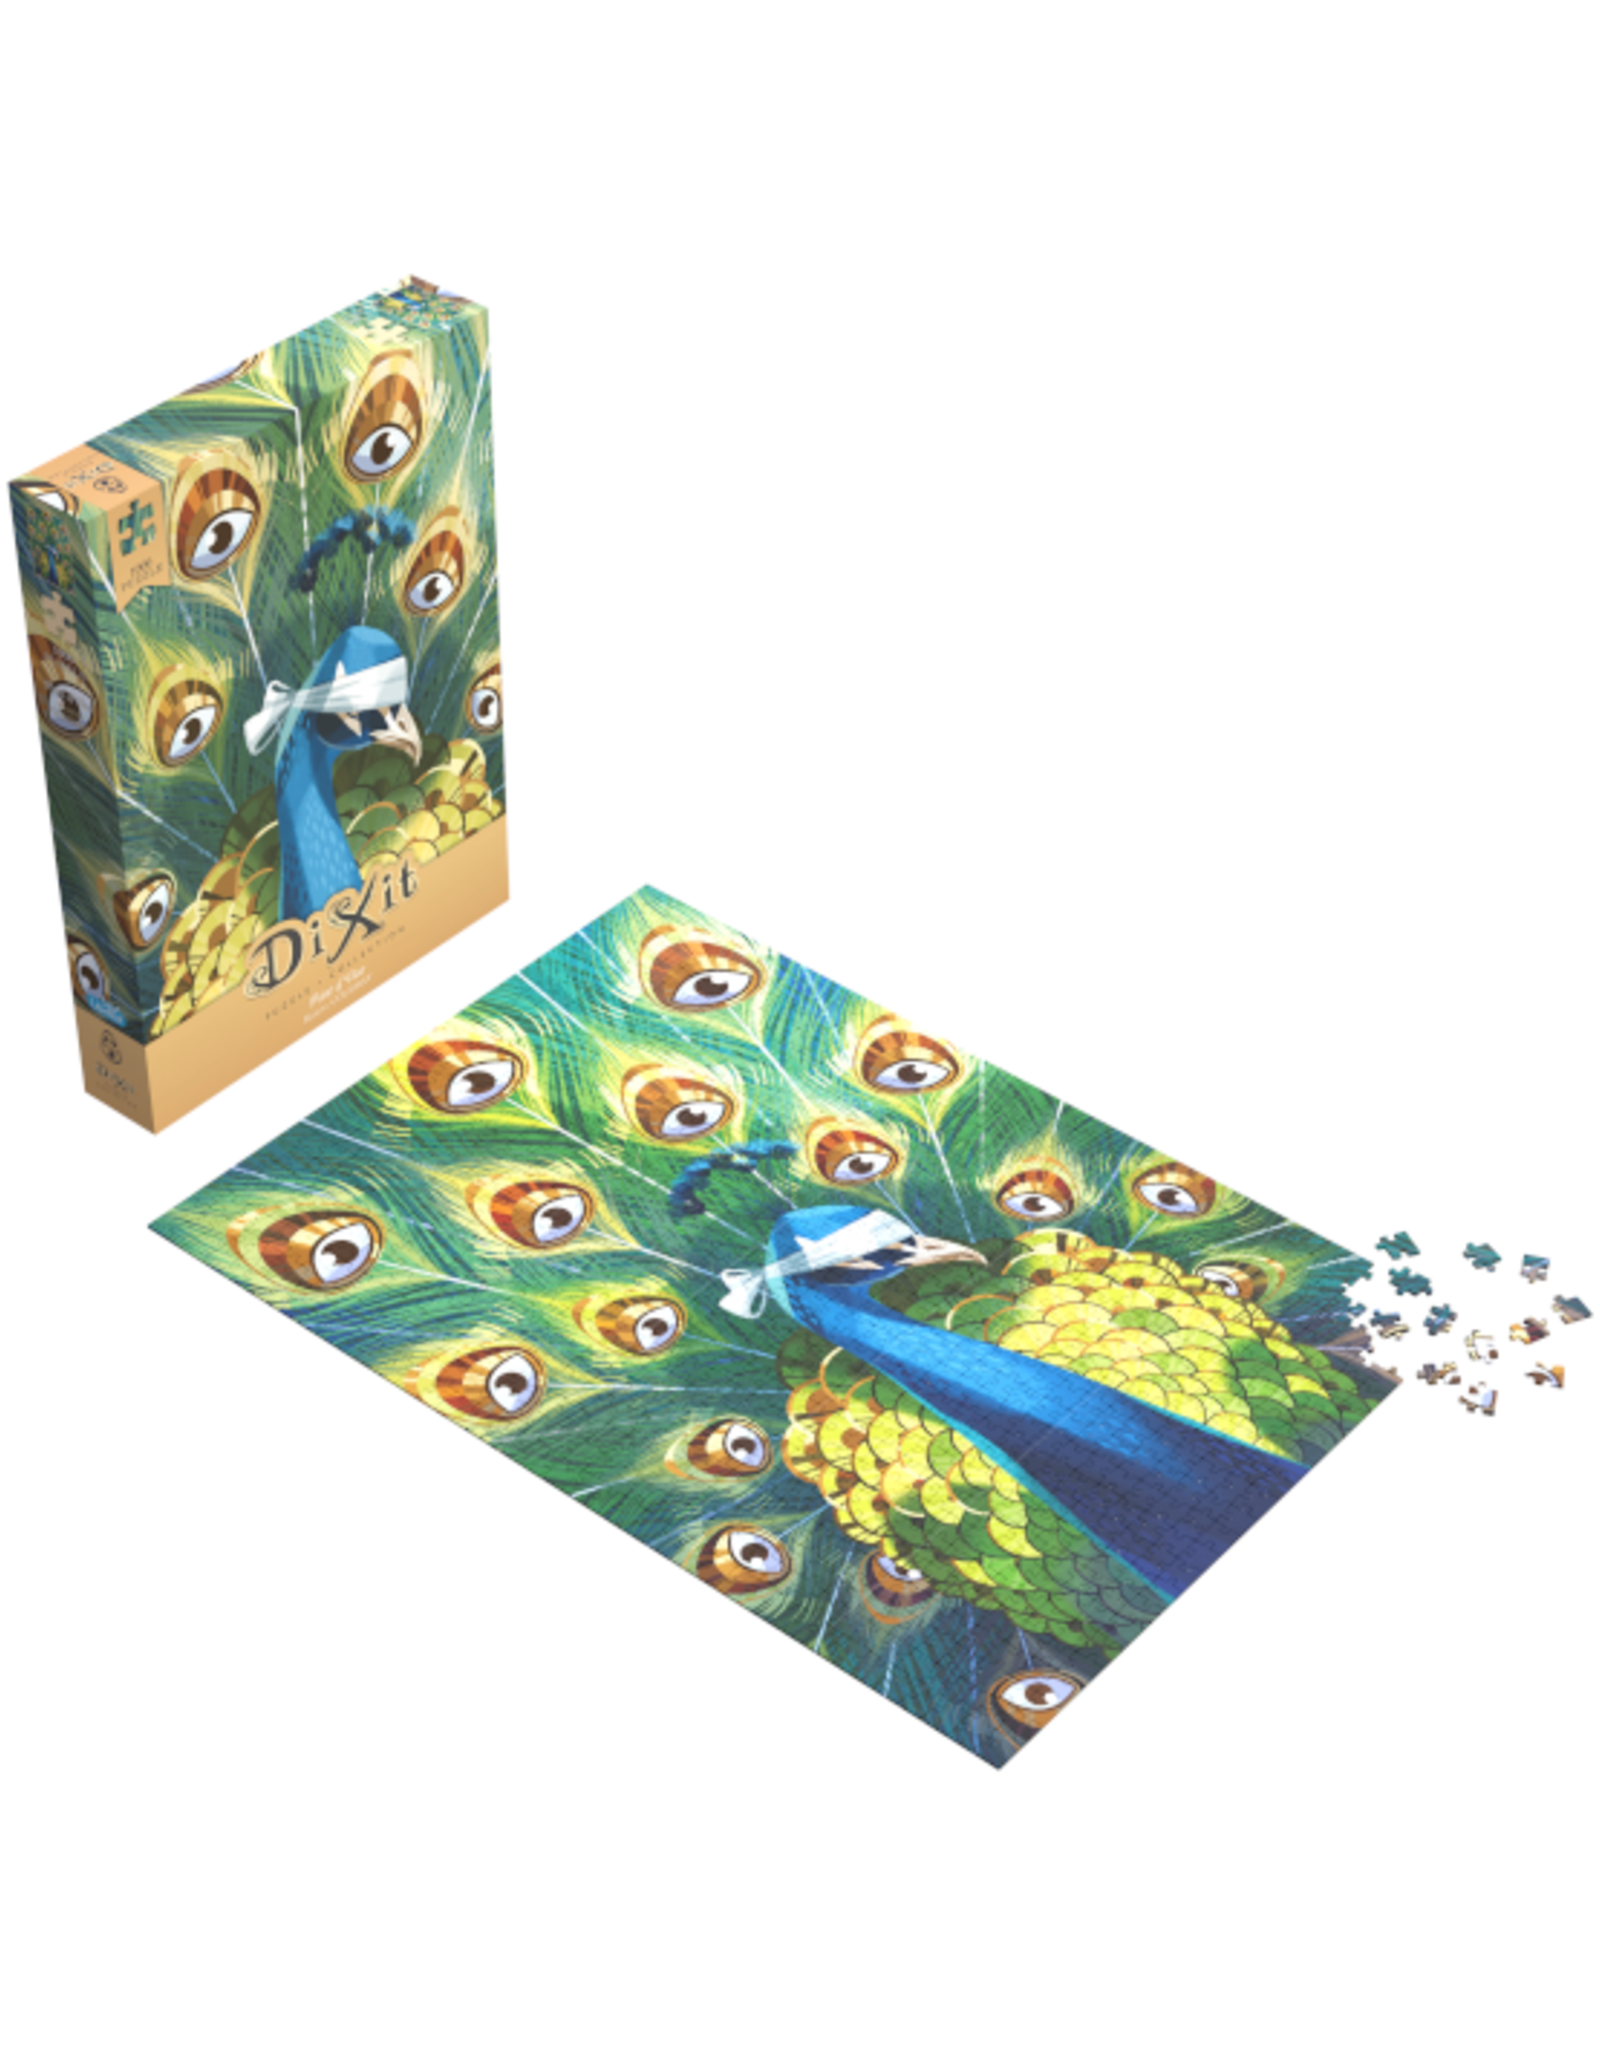 Libellud Libellud - 1000pcs - Dixit Puzzles: Point of View